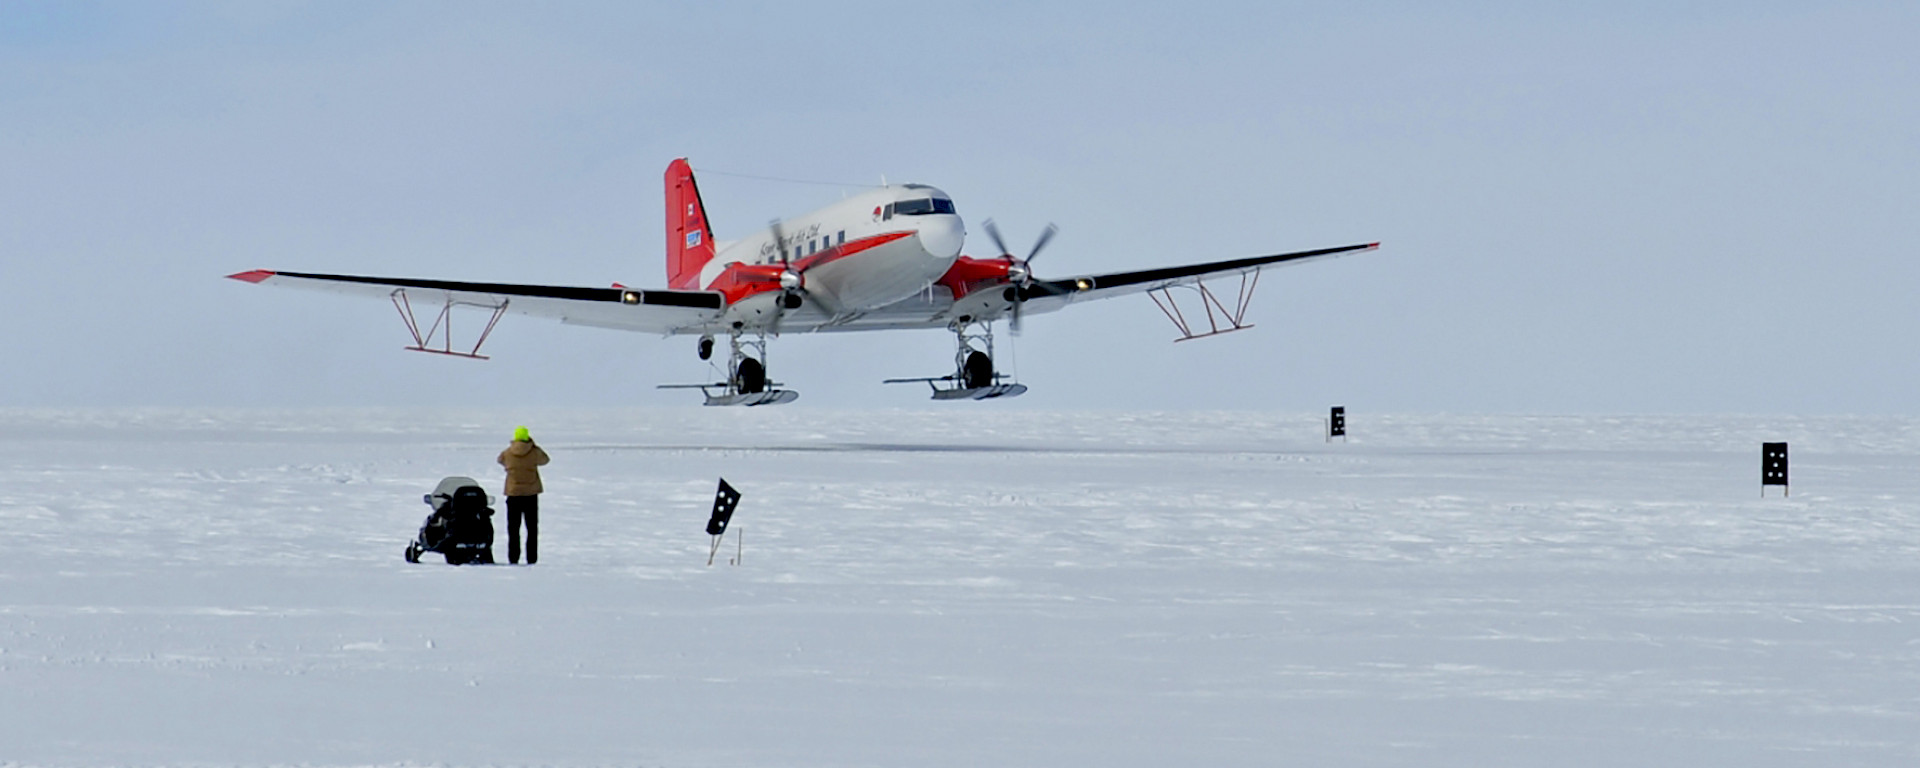 The 72 year old Basler BT-67 aircraft with its wing-mounted, ice penetrating radar antennae.